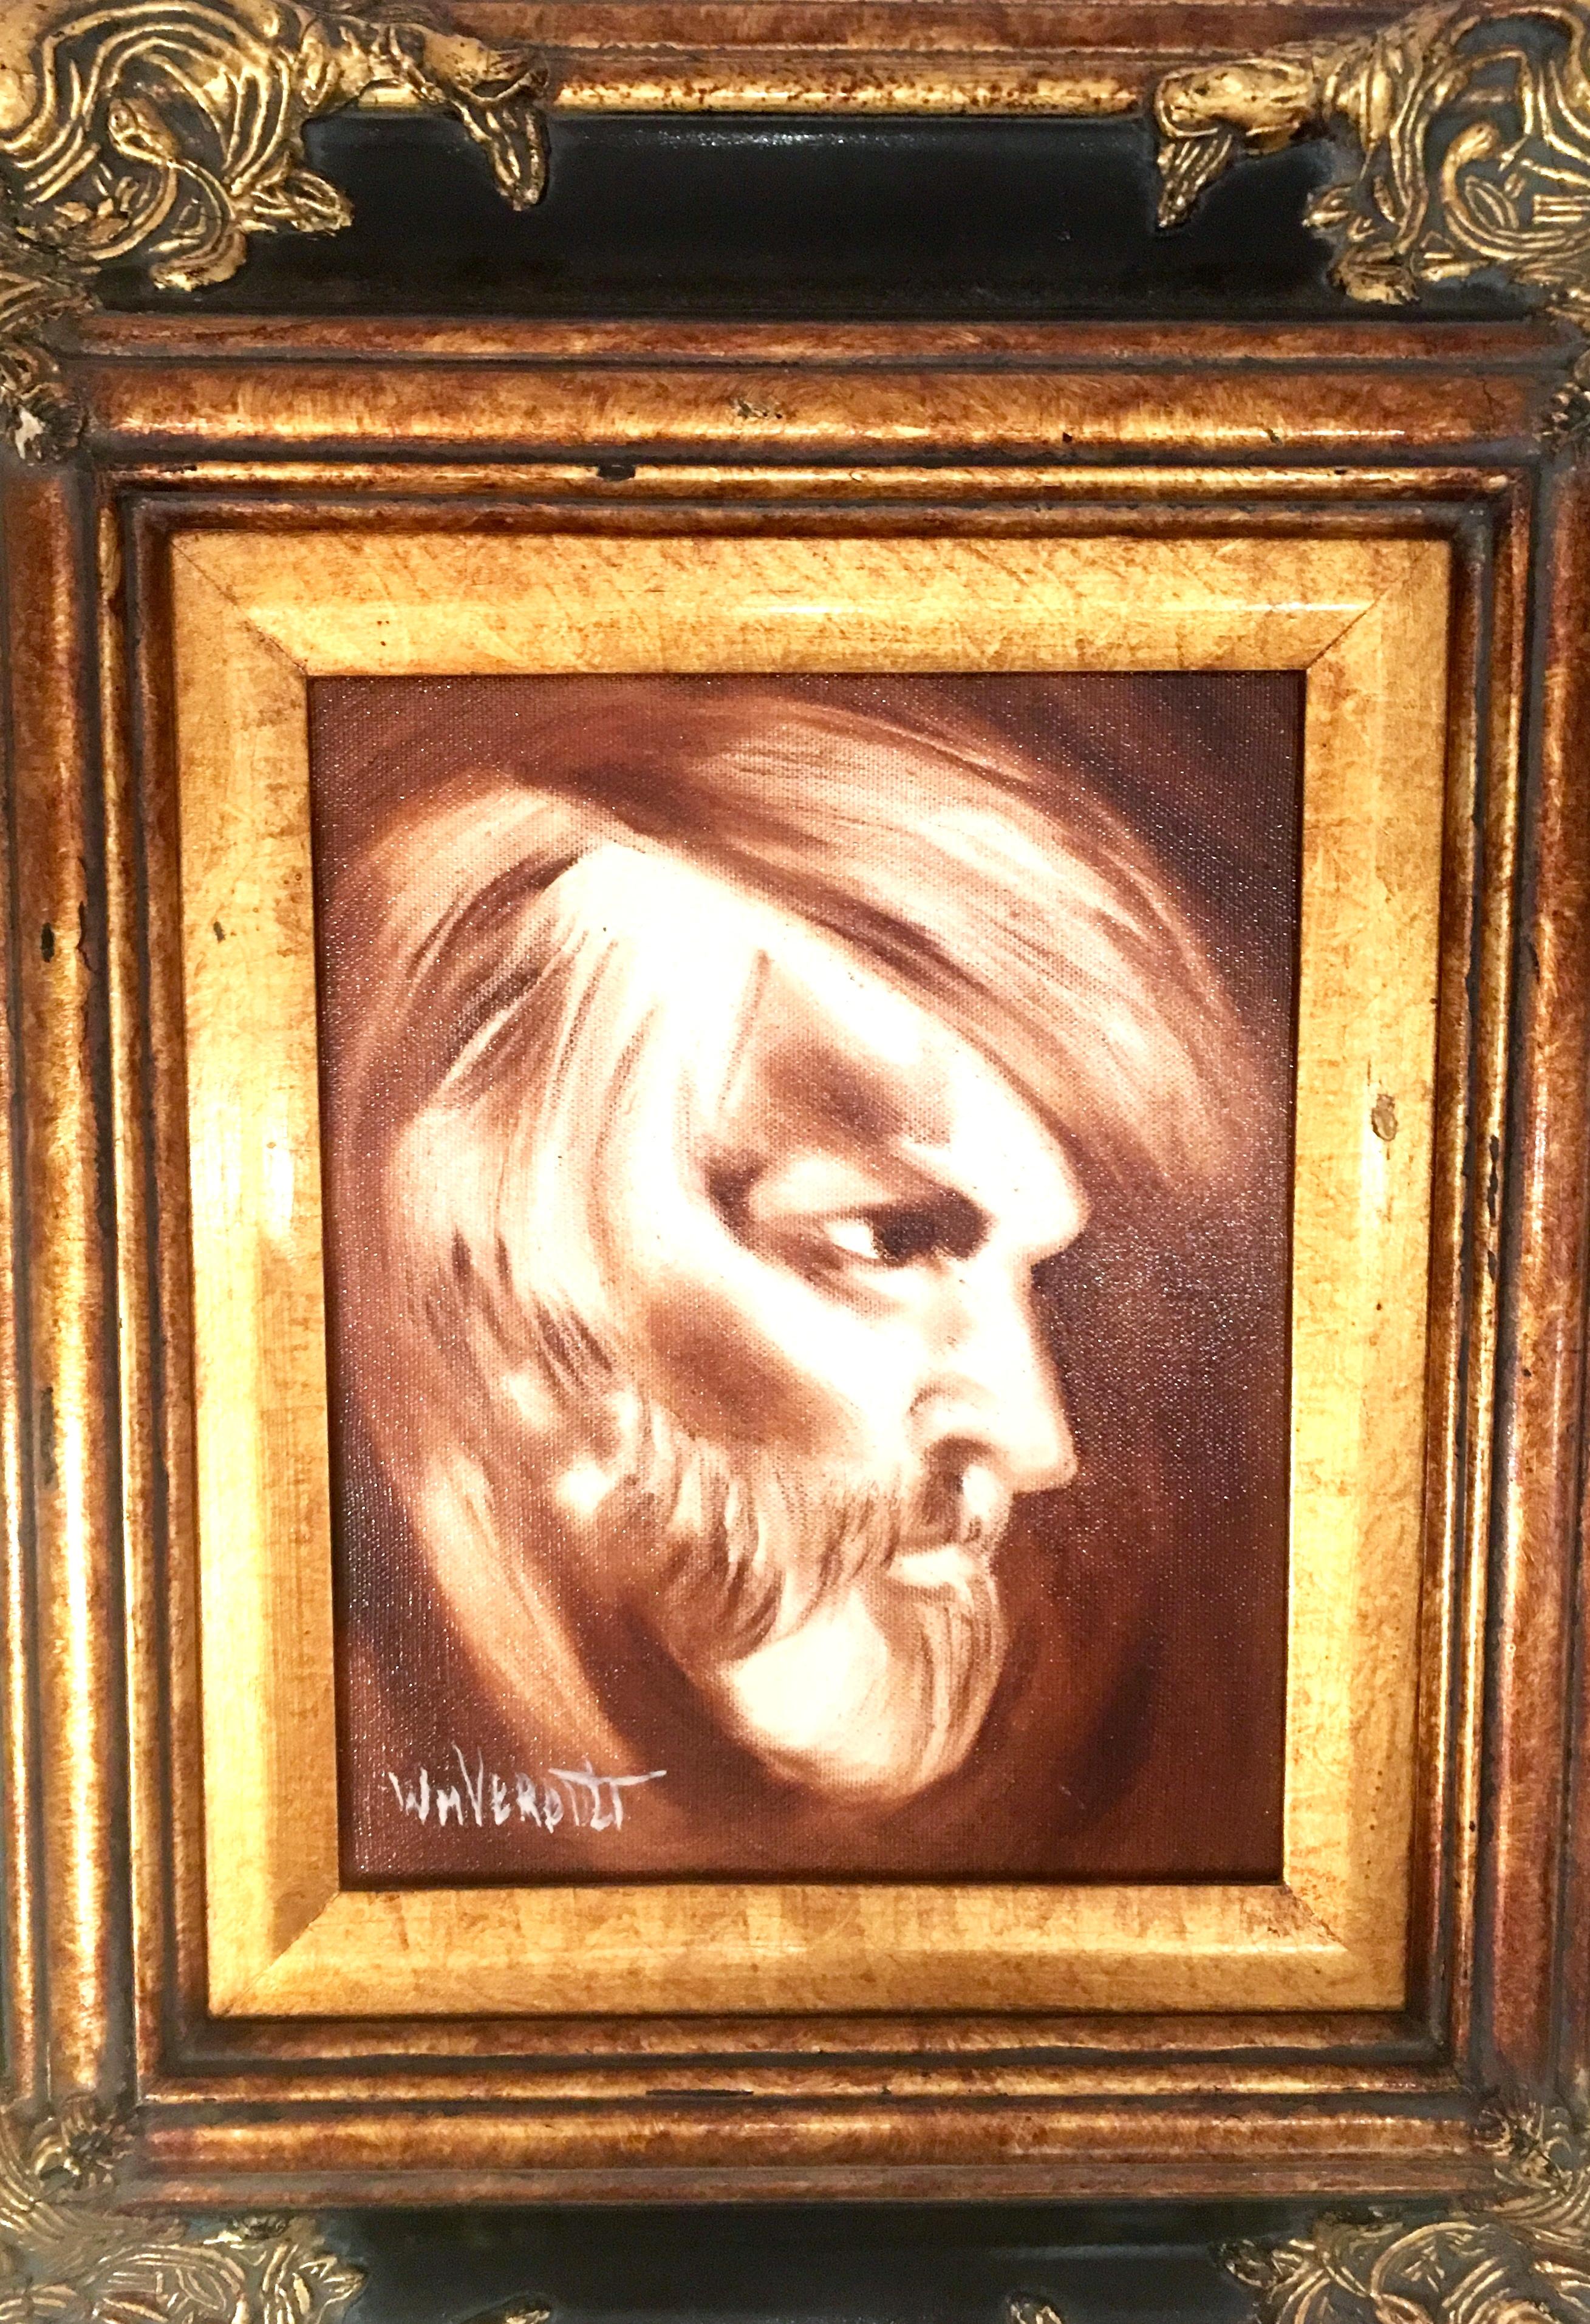 20th Century original oil on canvas painting by, William Verdult. Untitled bearded male portrait, features a monochromatic palette. Most likely a self portrait of William Verdult. Framed in an elaborate and exceptionally crafted hand carved gilt